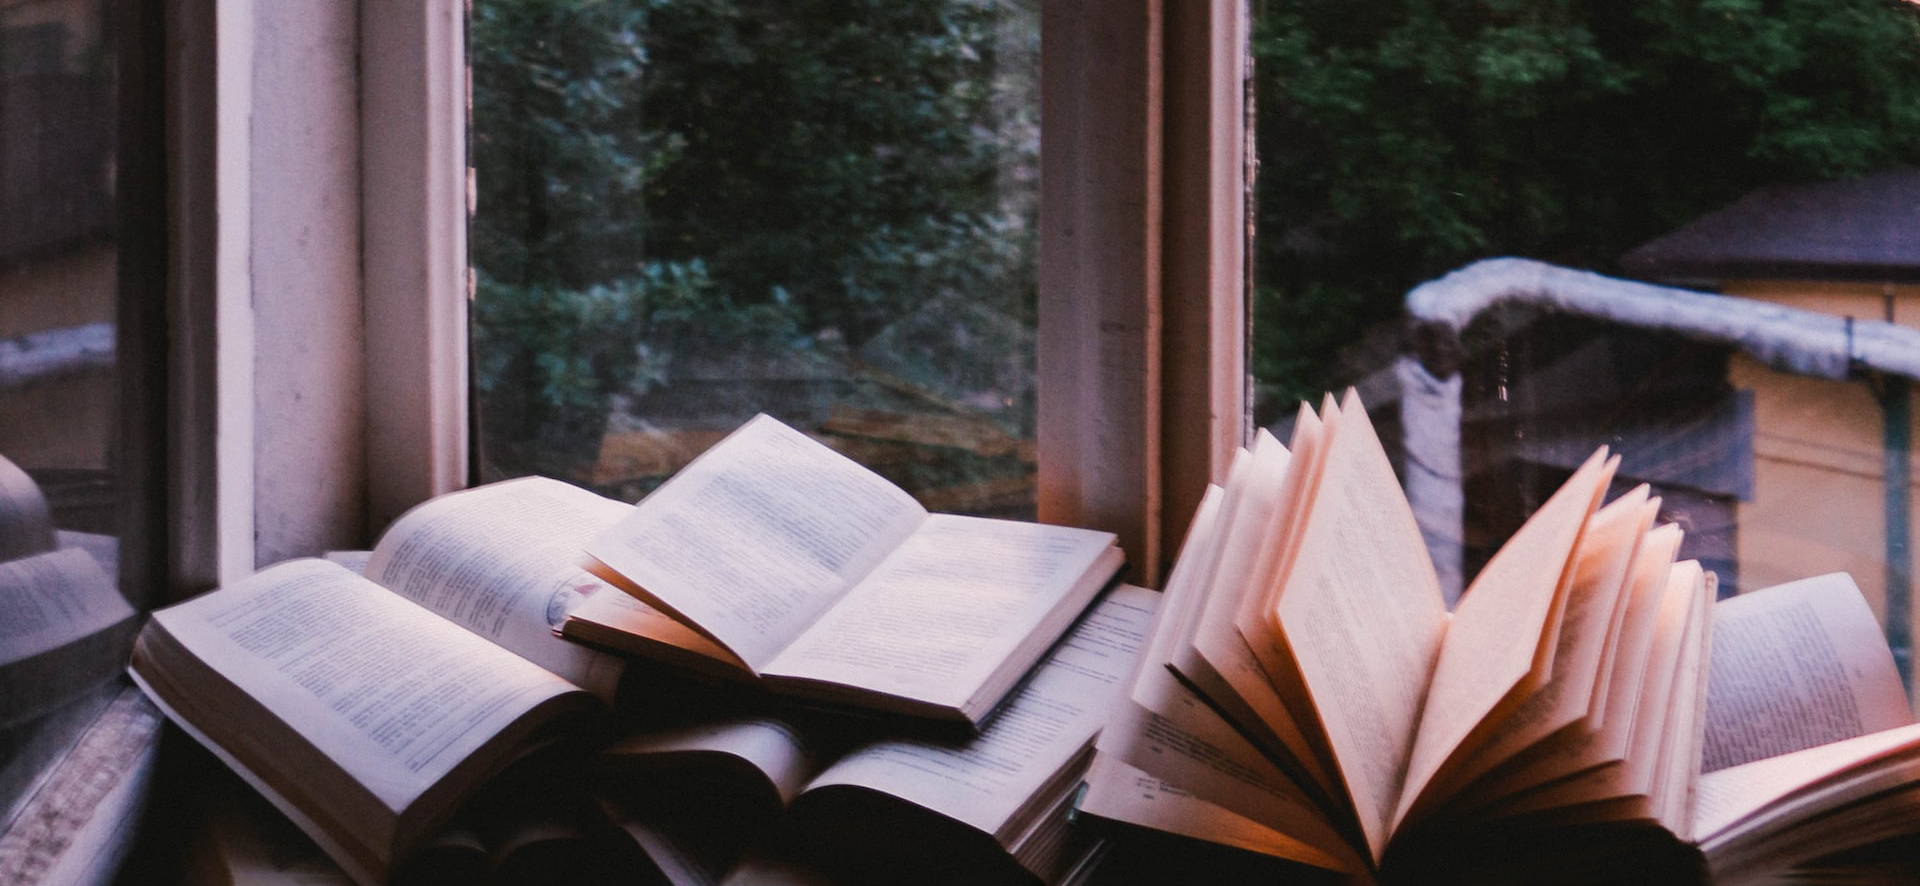 Books on a window ledge during sunset